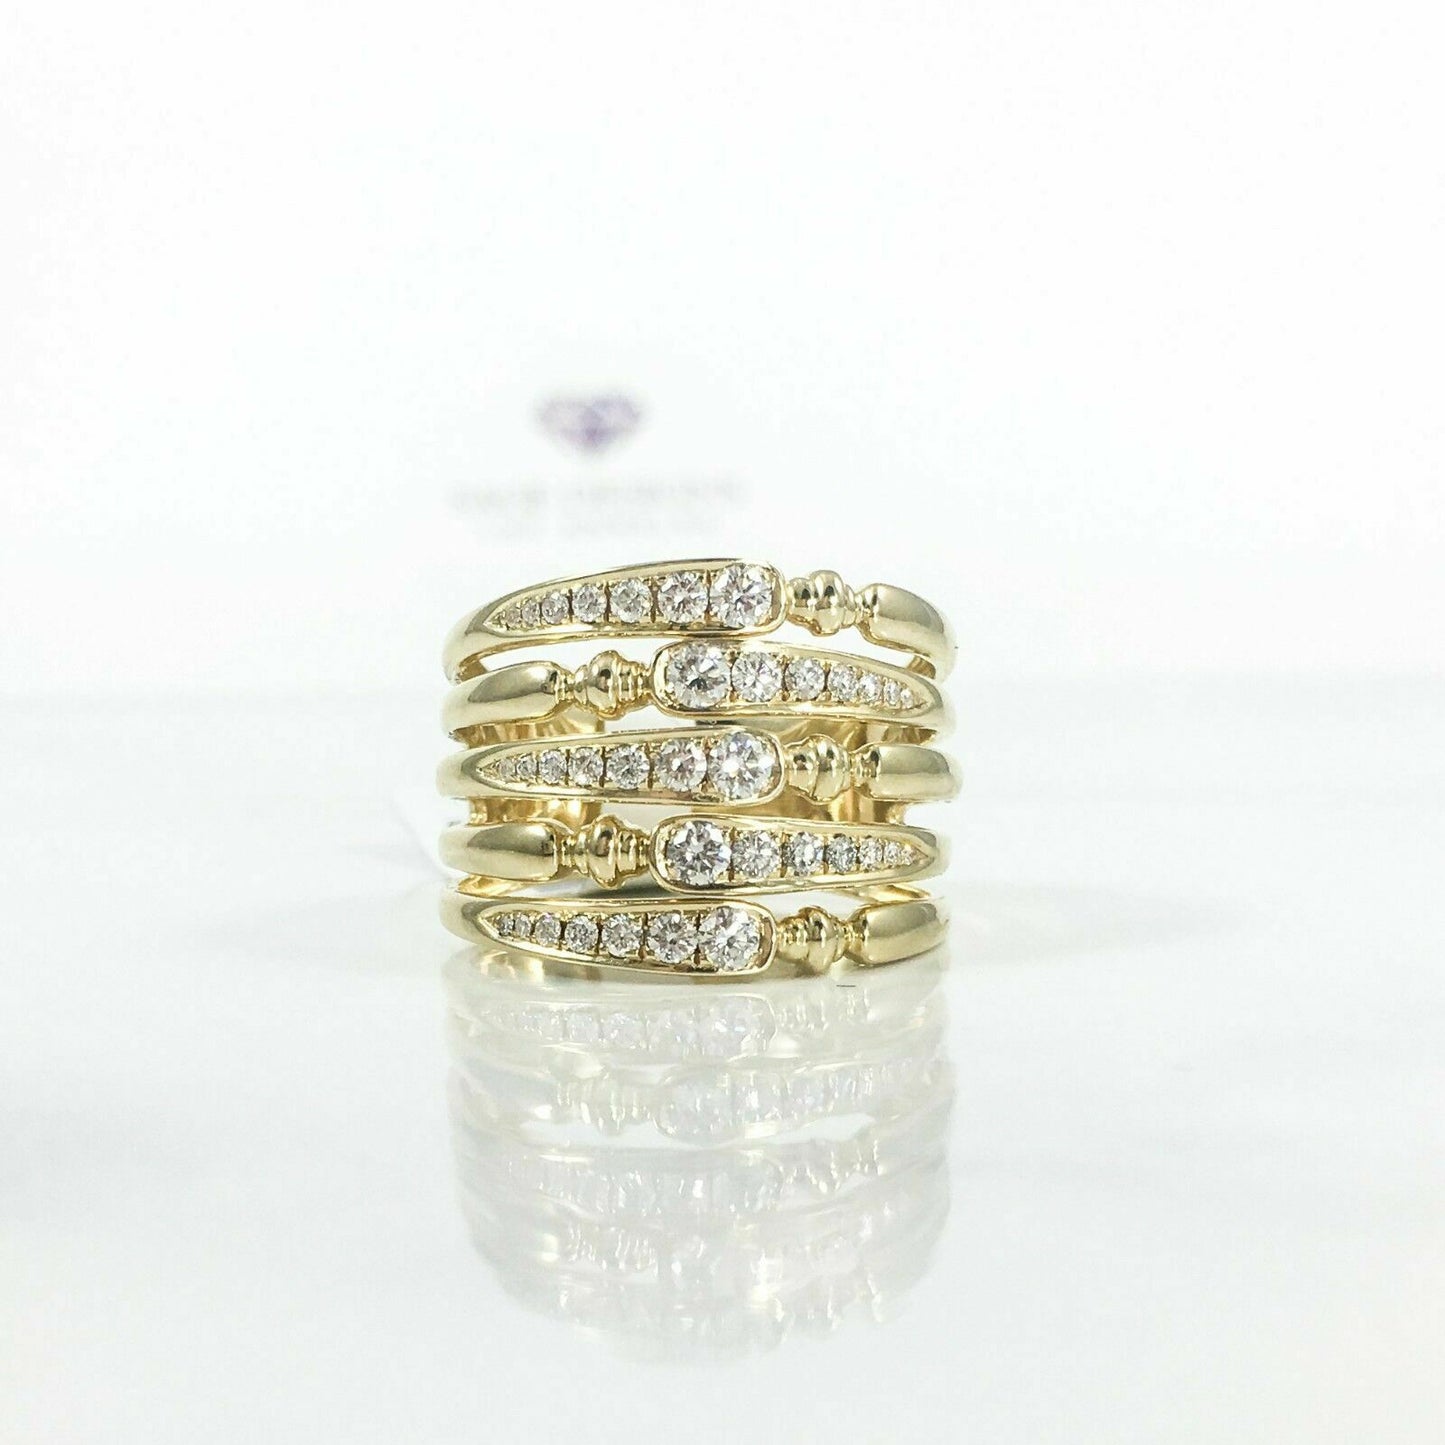 14k Gold 0.75 CT Diamond Wide Cocktail Multi Row Band Ring Natural Round Cut